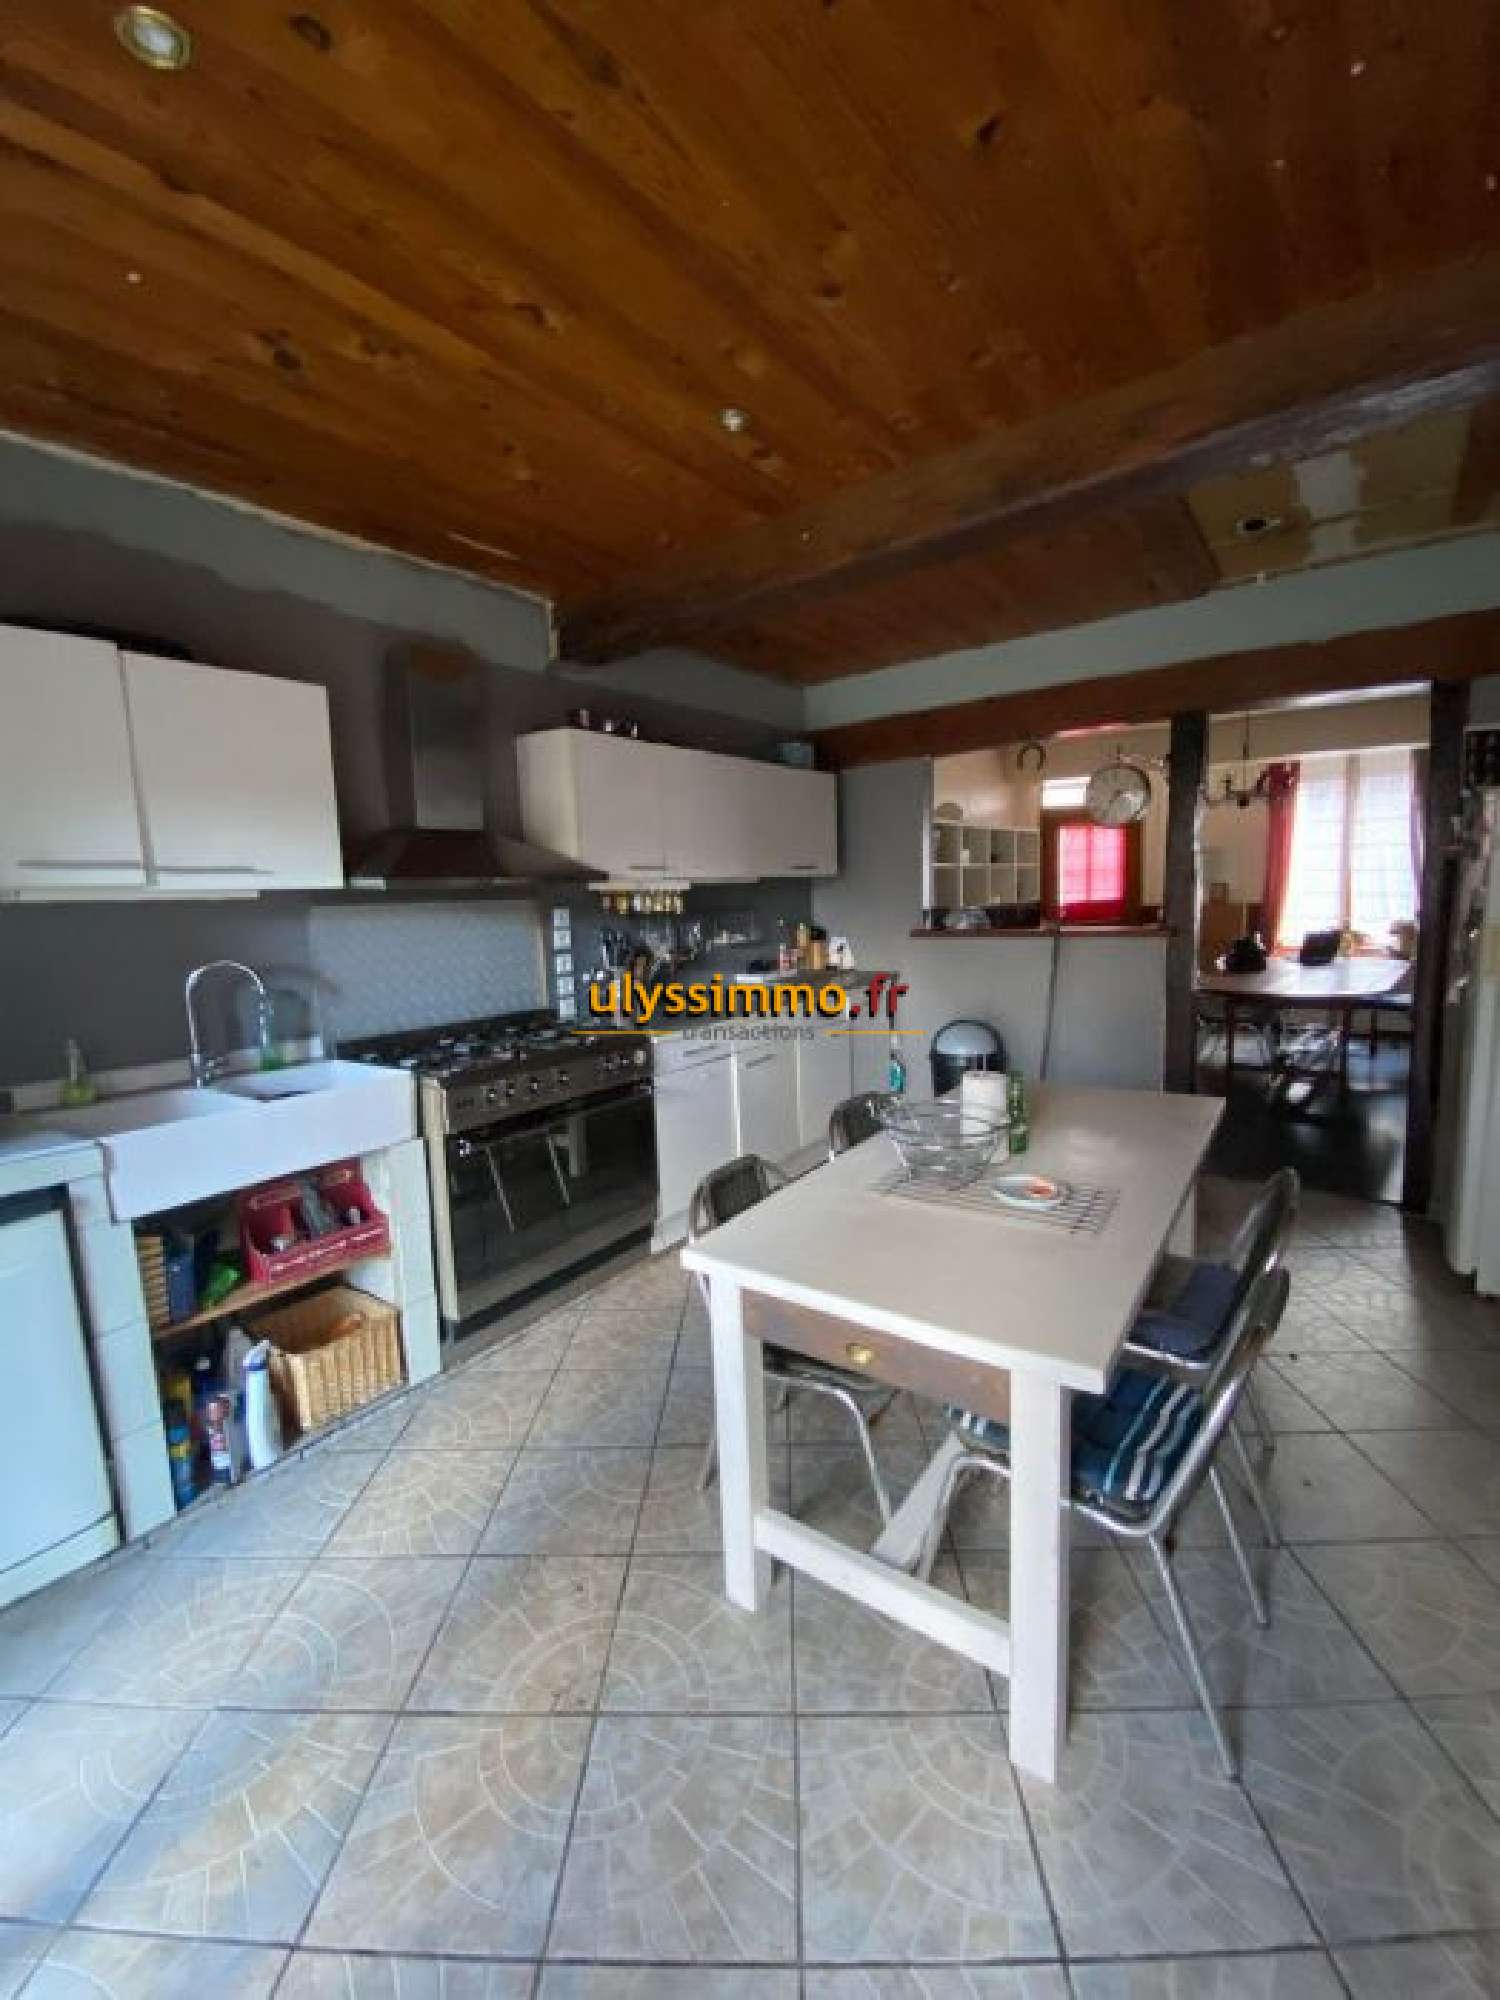  for sale house Nesle Somme 2